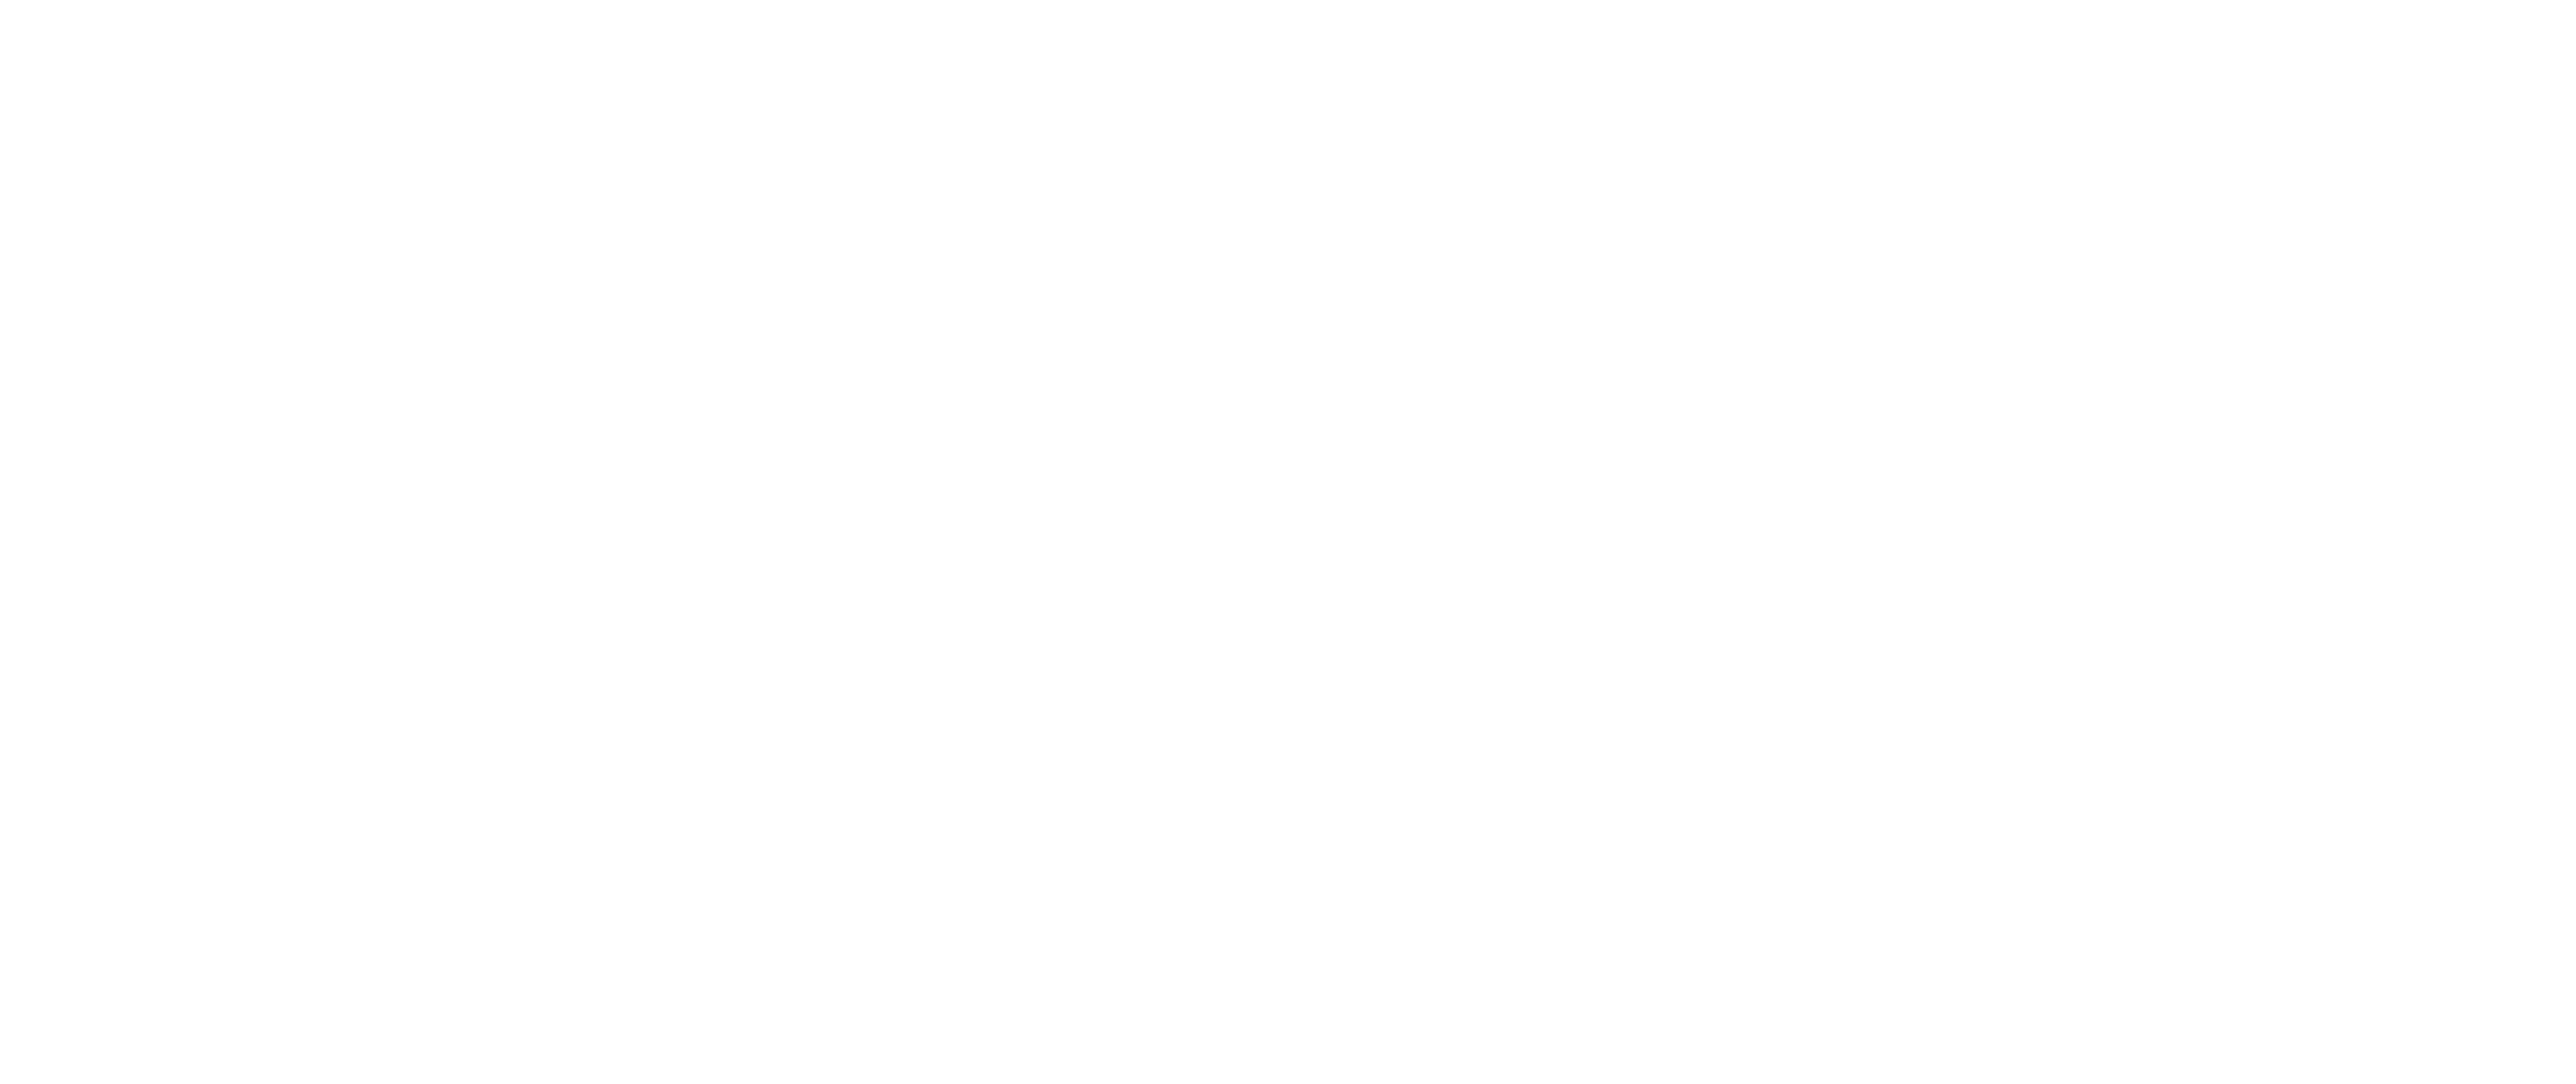 Nokia: Catching the Opportunity to Give Your Community a Digital Boost